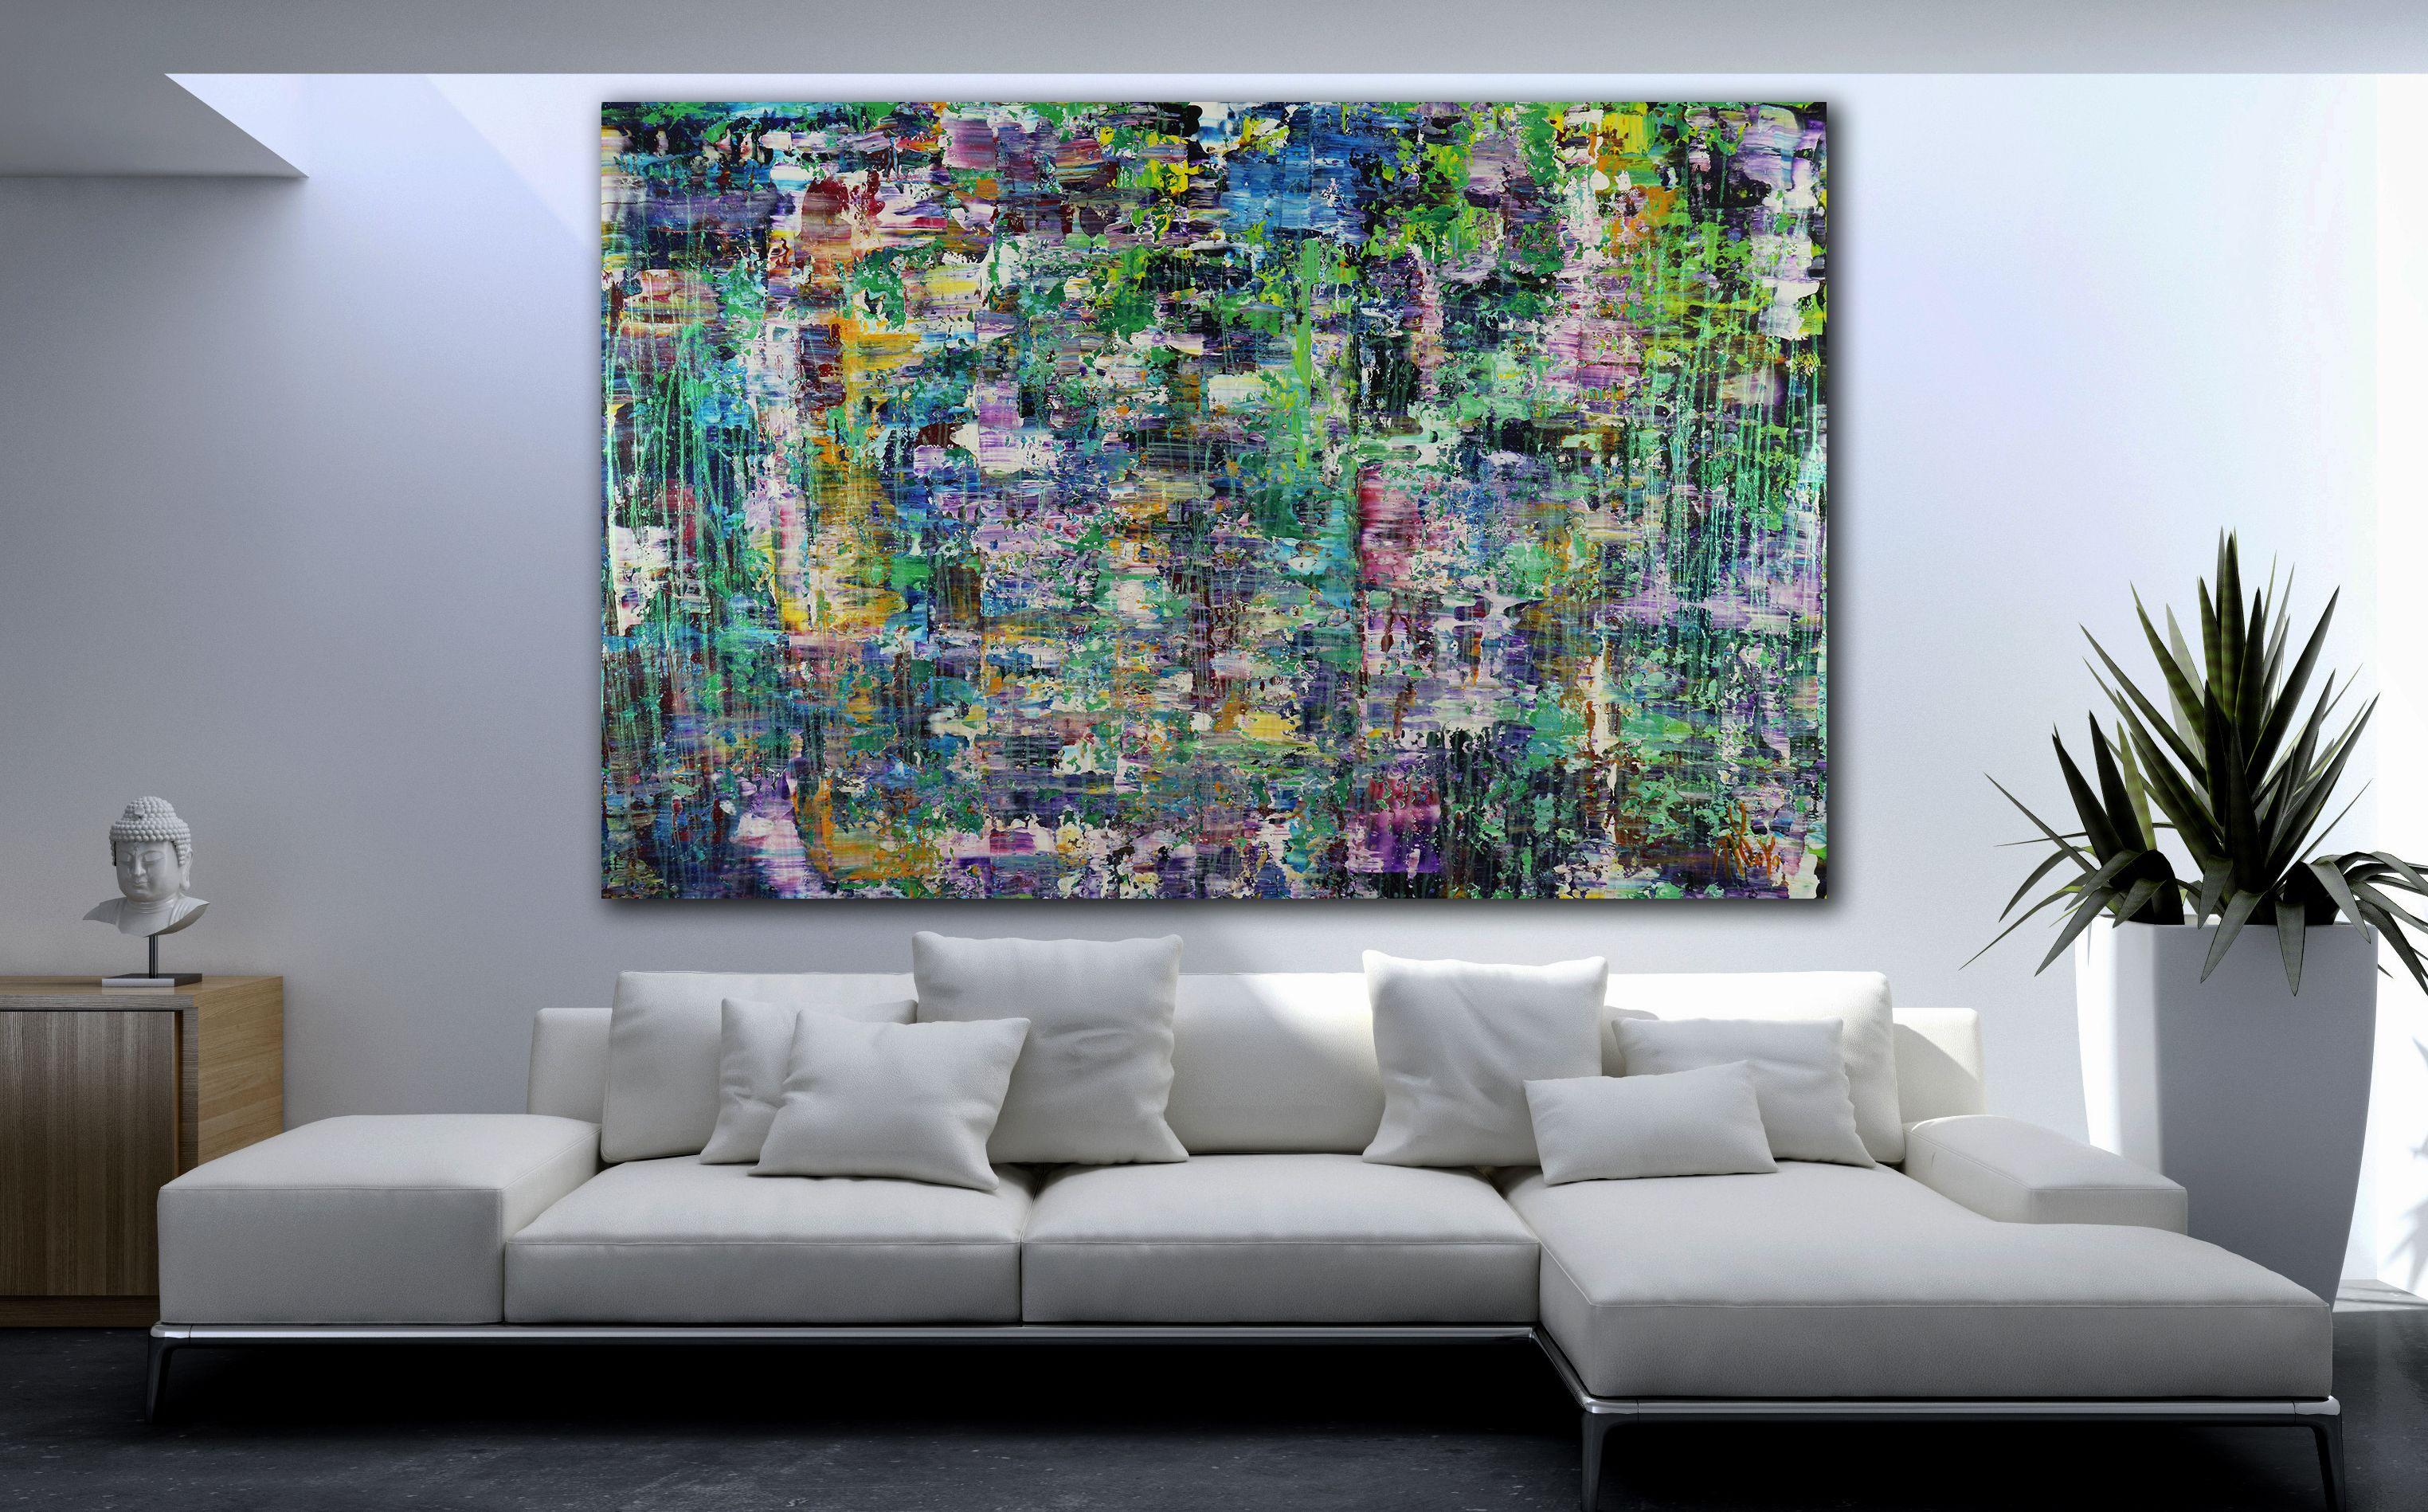 Impactful iridescent abstract colorfield with earthy shades of blue, white, pale blue, purple, greens, cadmium yellow, rose and a shower of Iridescent green. lots of light and nature. Signed in front. Lots of iridescence!    I include a certificate